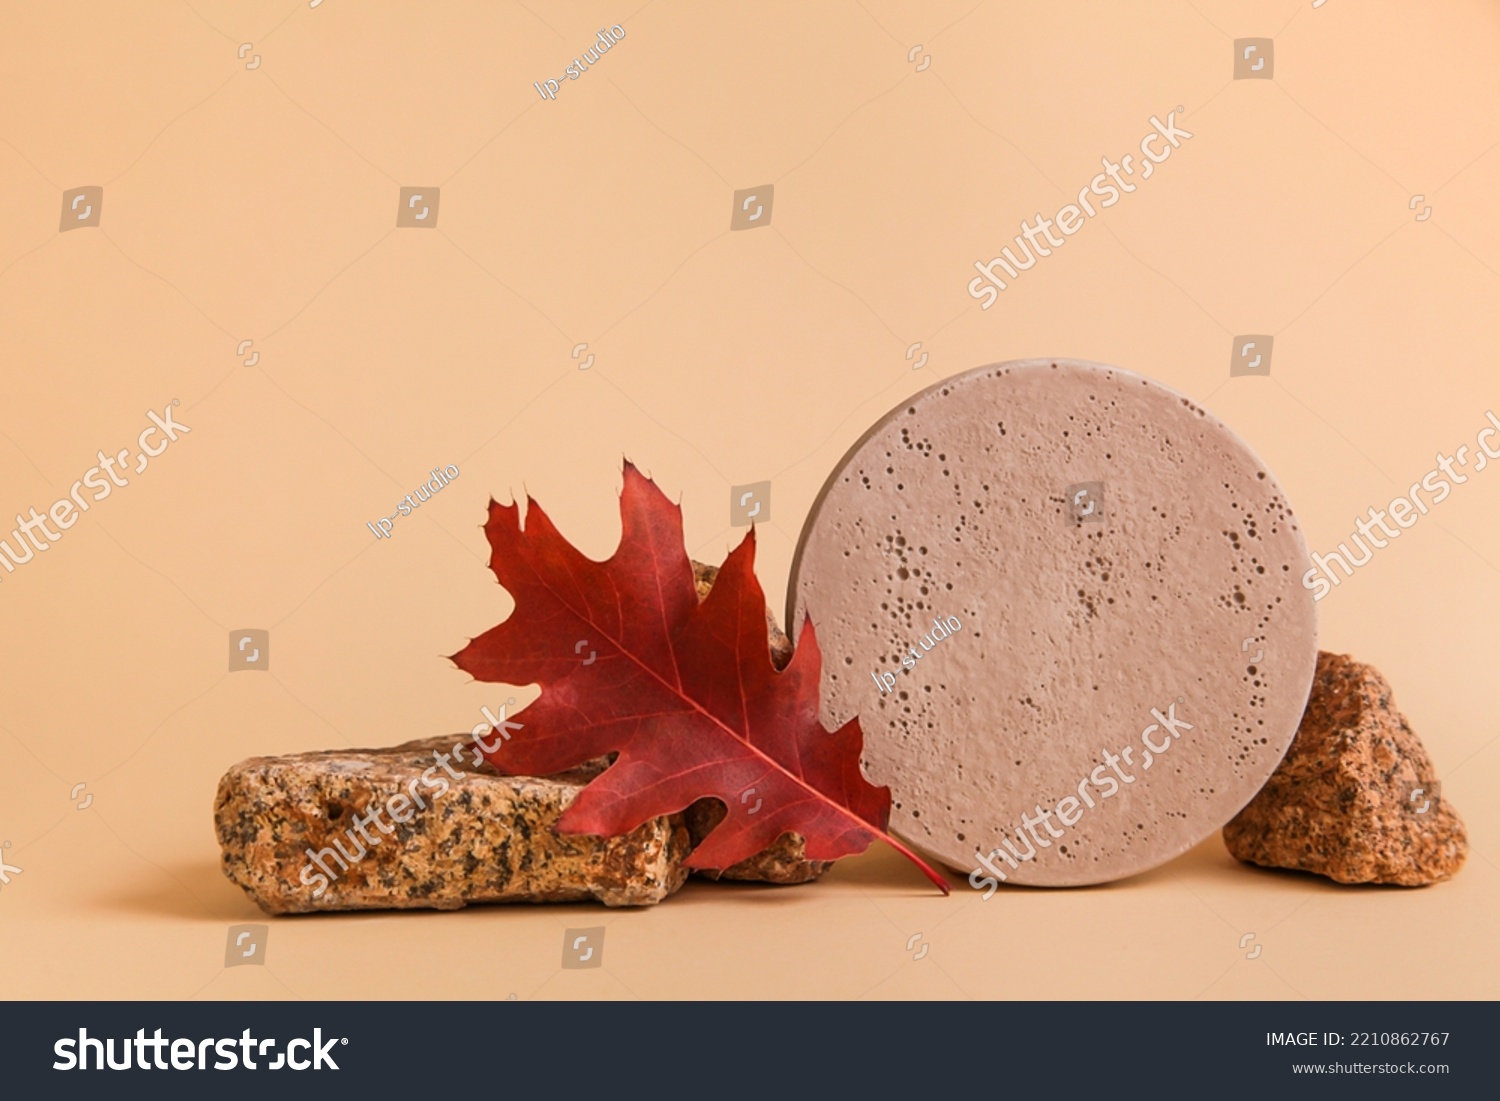 natural stone, decor and autumn leaves against beige background. Fall Seasonal Background #2210862767